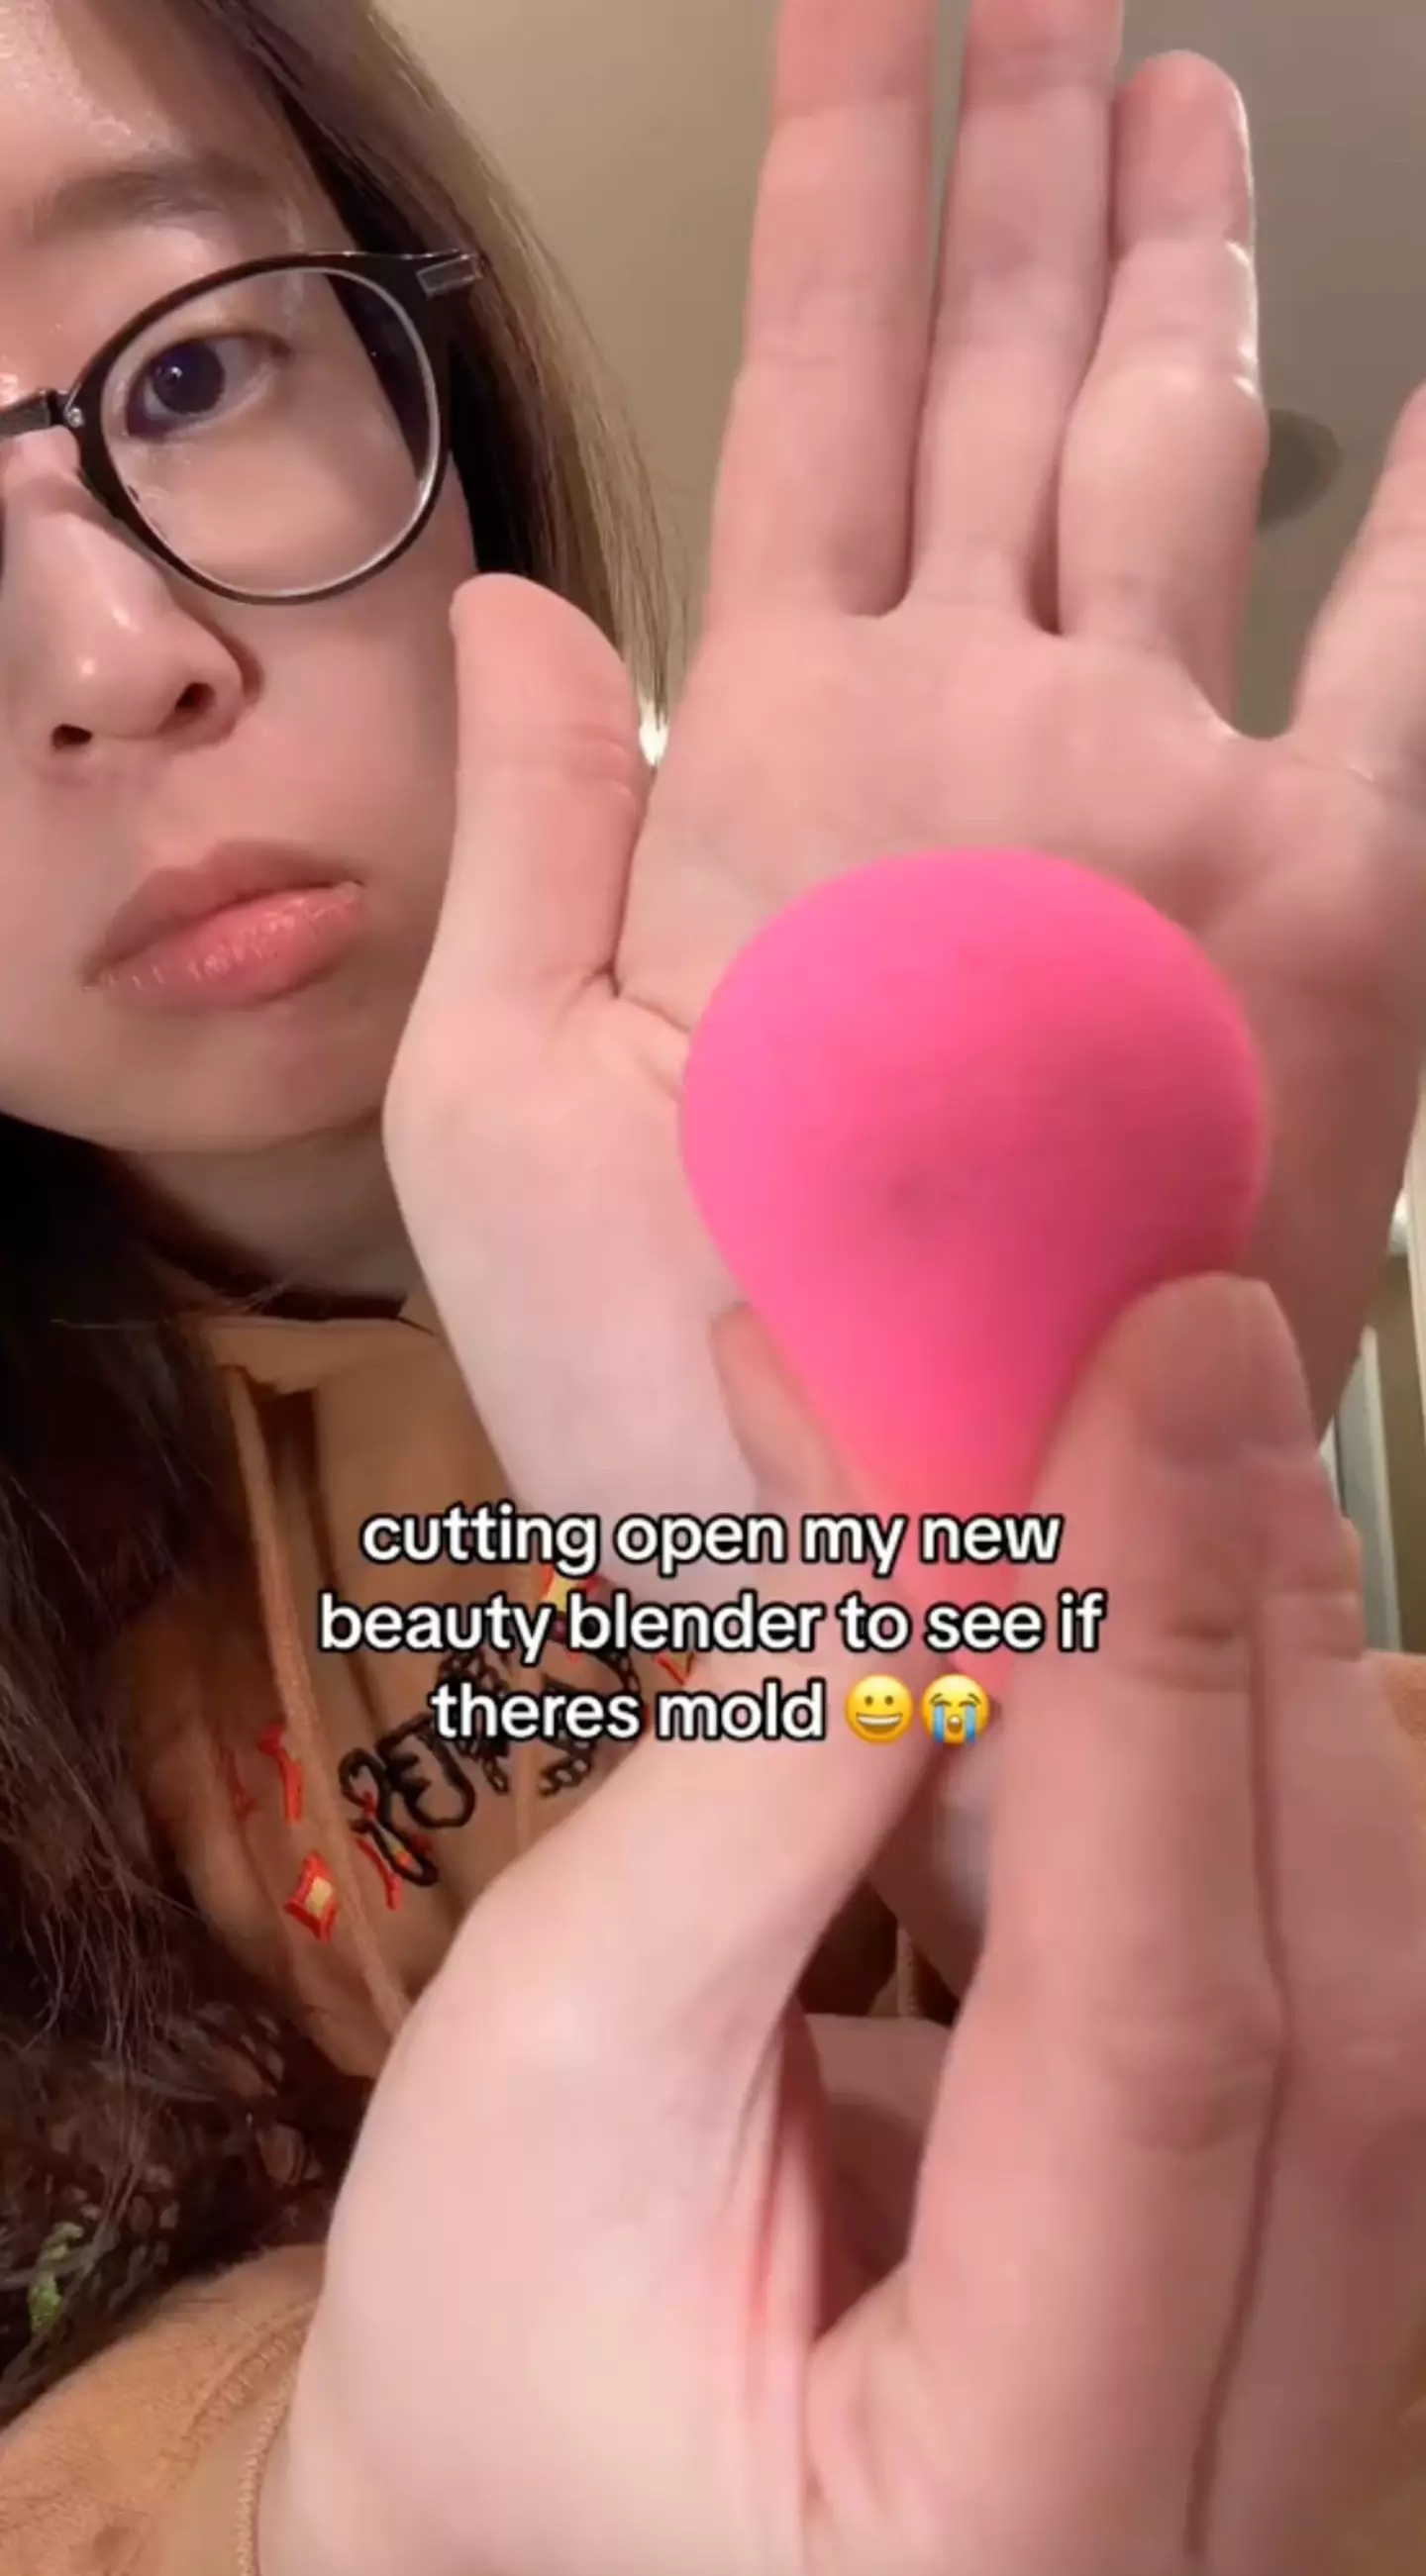 The beauty influencer wanted to see what was inside her beauty blender.